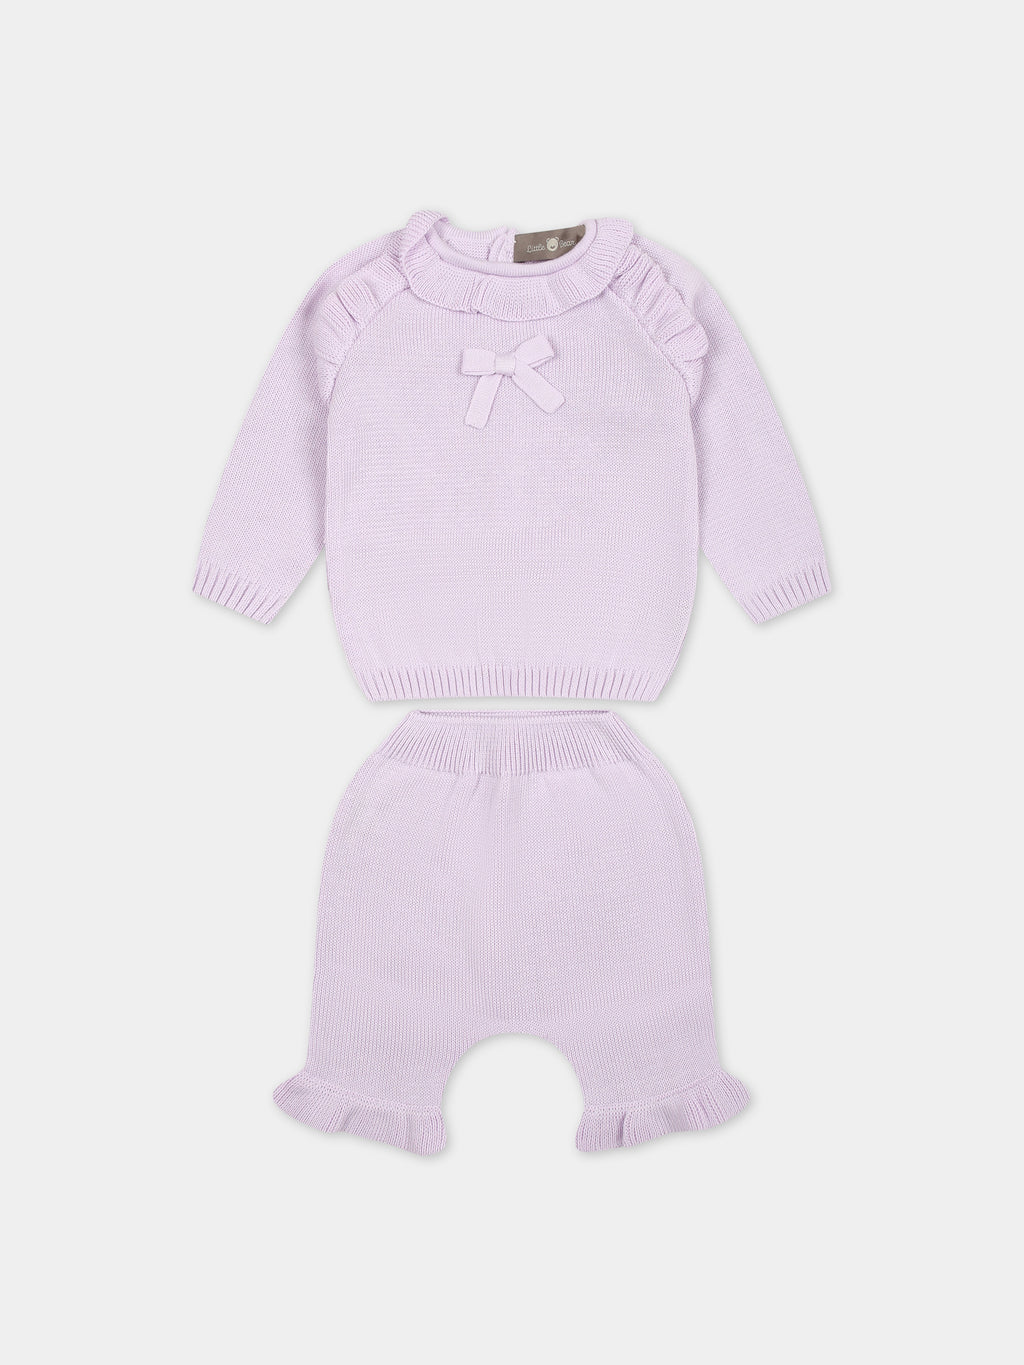 Wisteria birth suit for baby girl